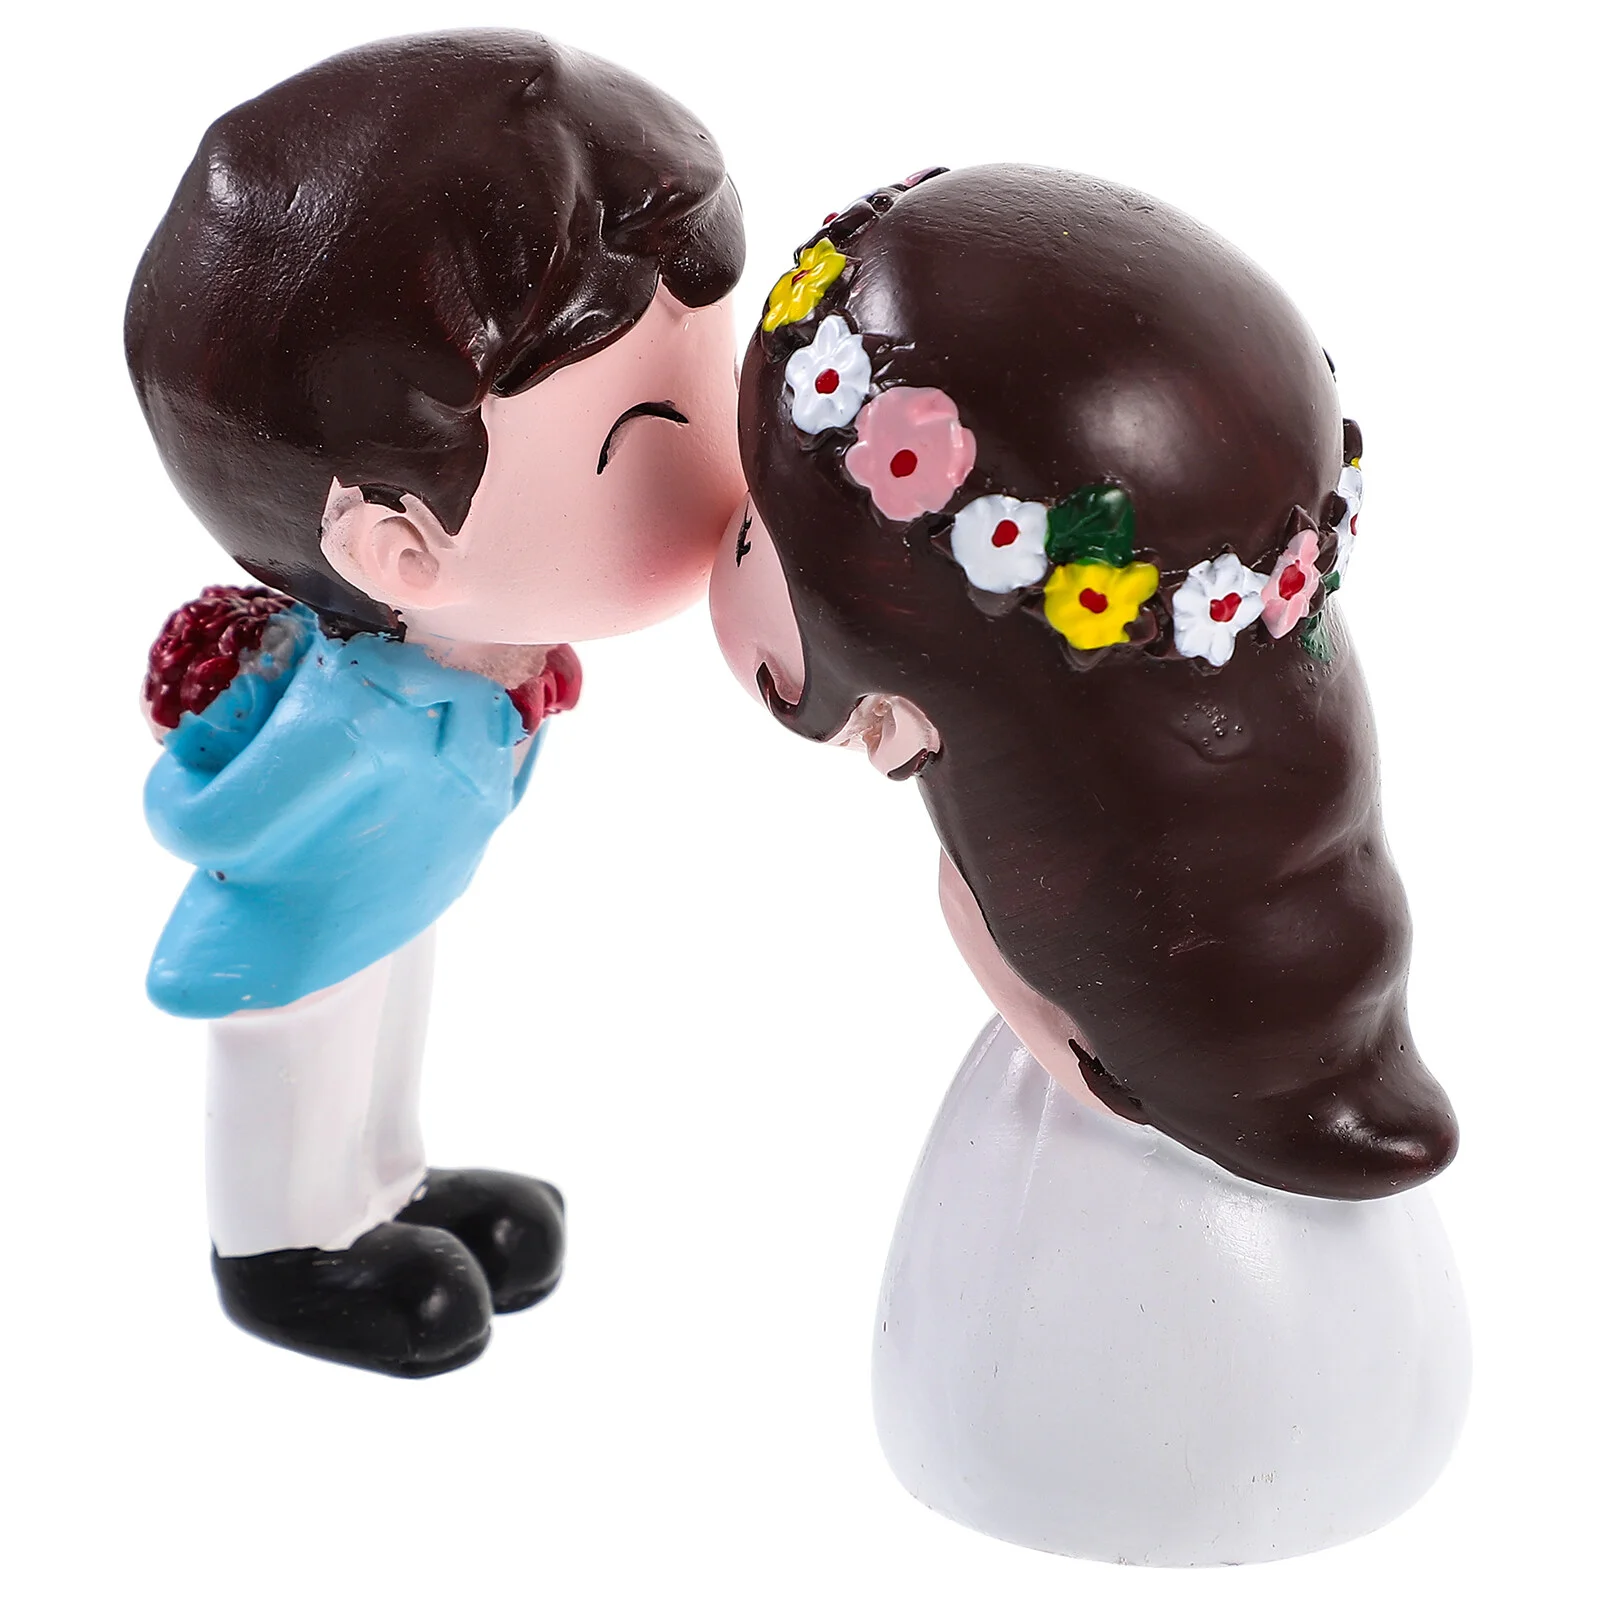 

Bride Groom Figurine Cake Topper, Kiss Couple Cake Ornament, Romantic Girl and Boy Kissing Statue for Wedding Party Cake